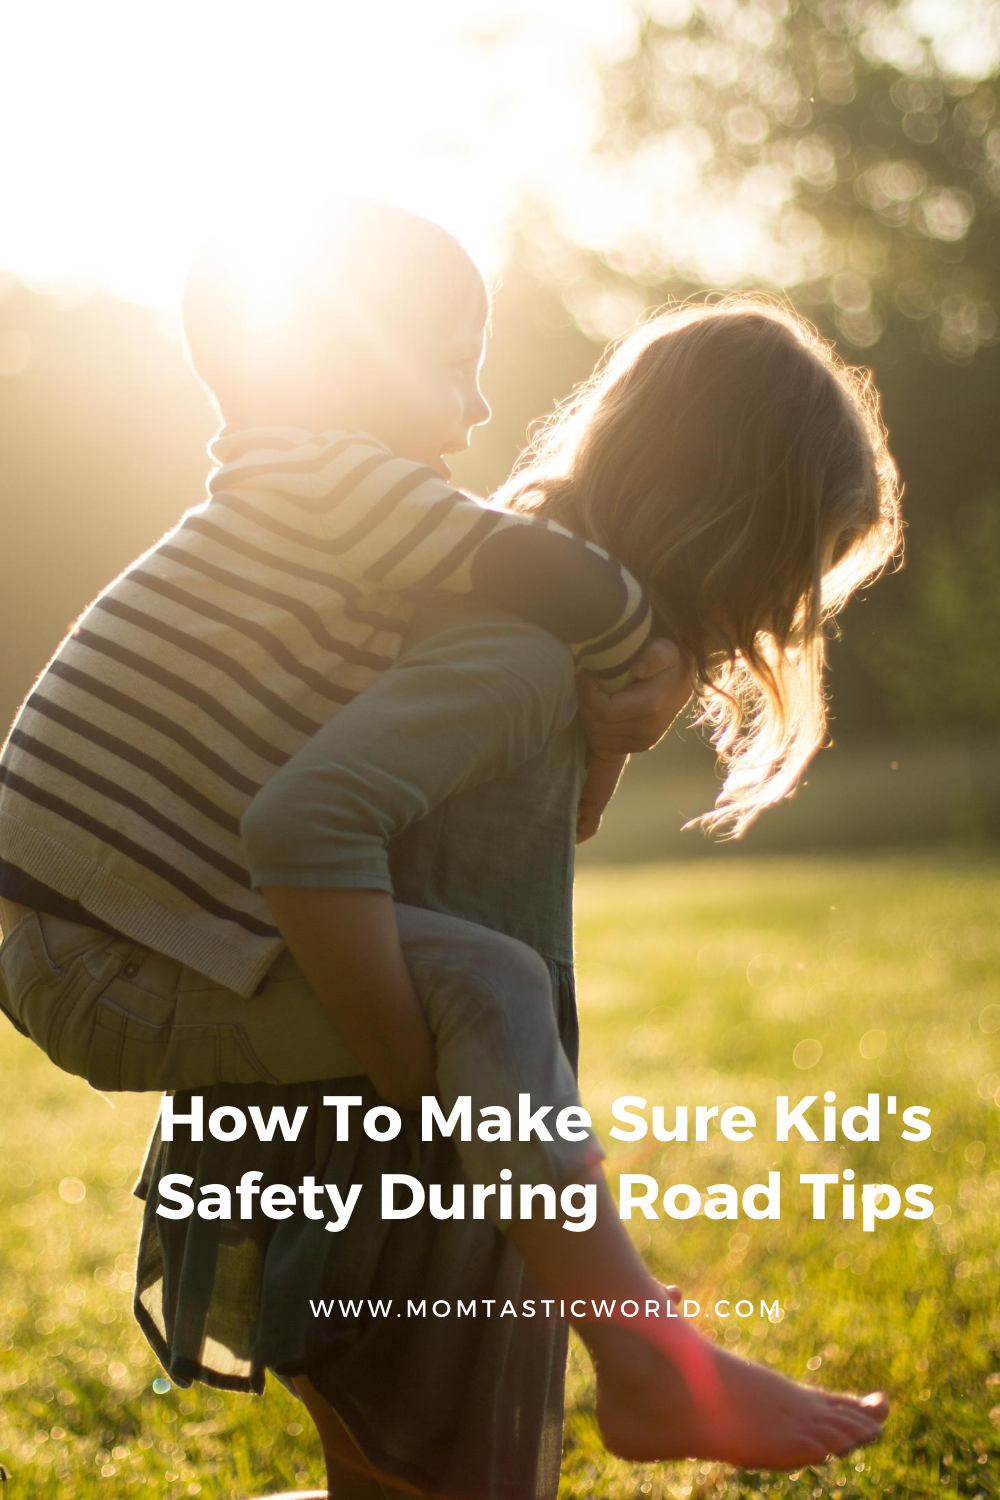 How To Make Sure Kid’s Safety During Road Tips – Our Travel Experience During Pandemic